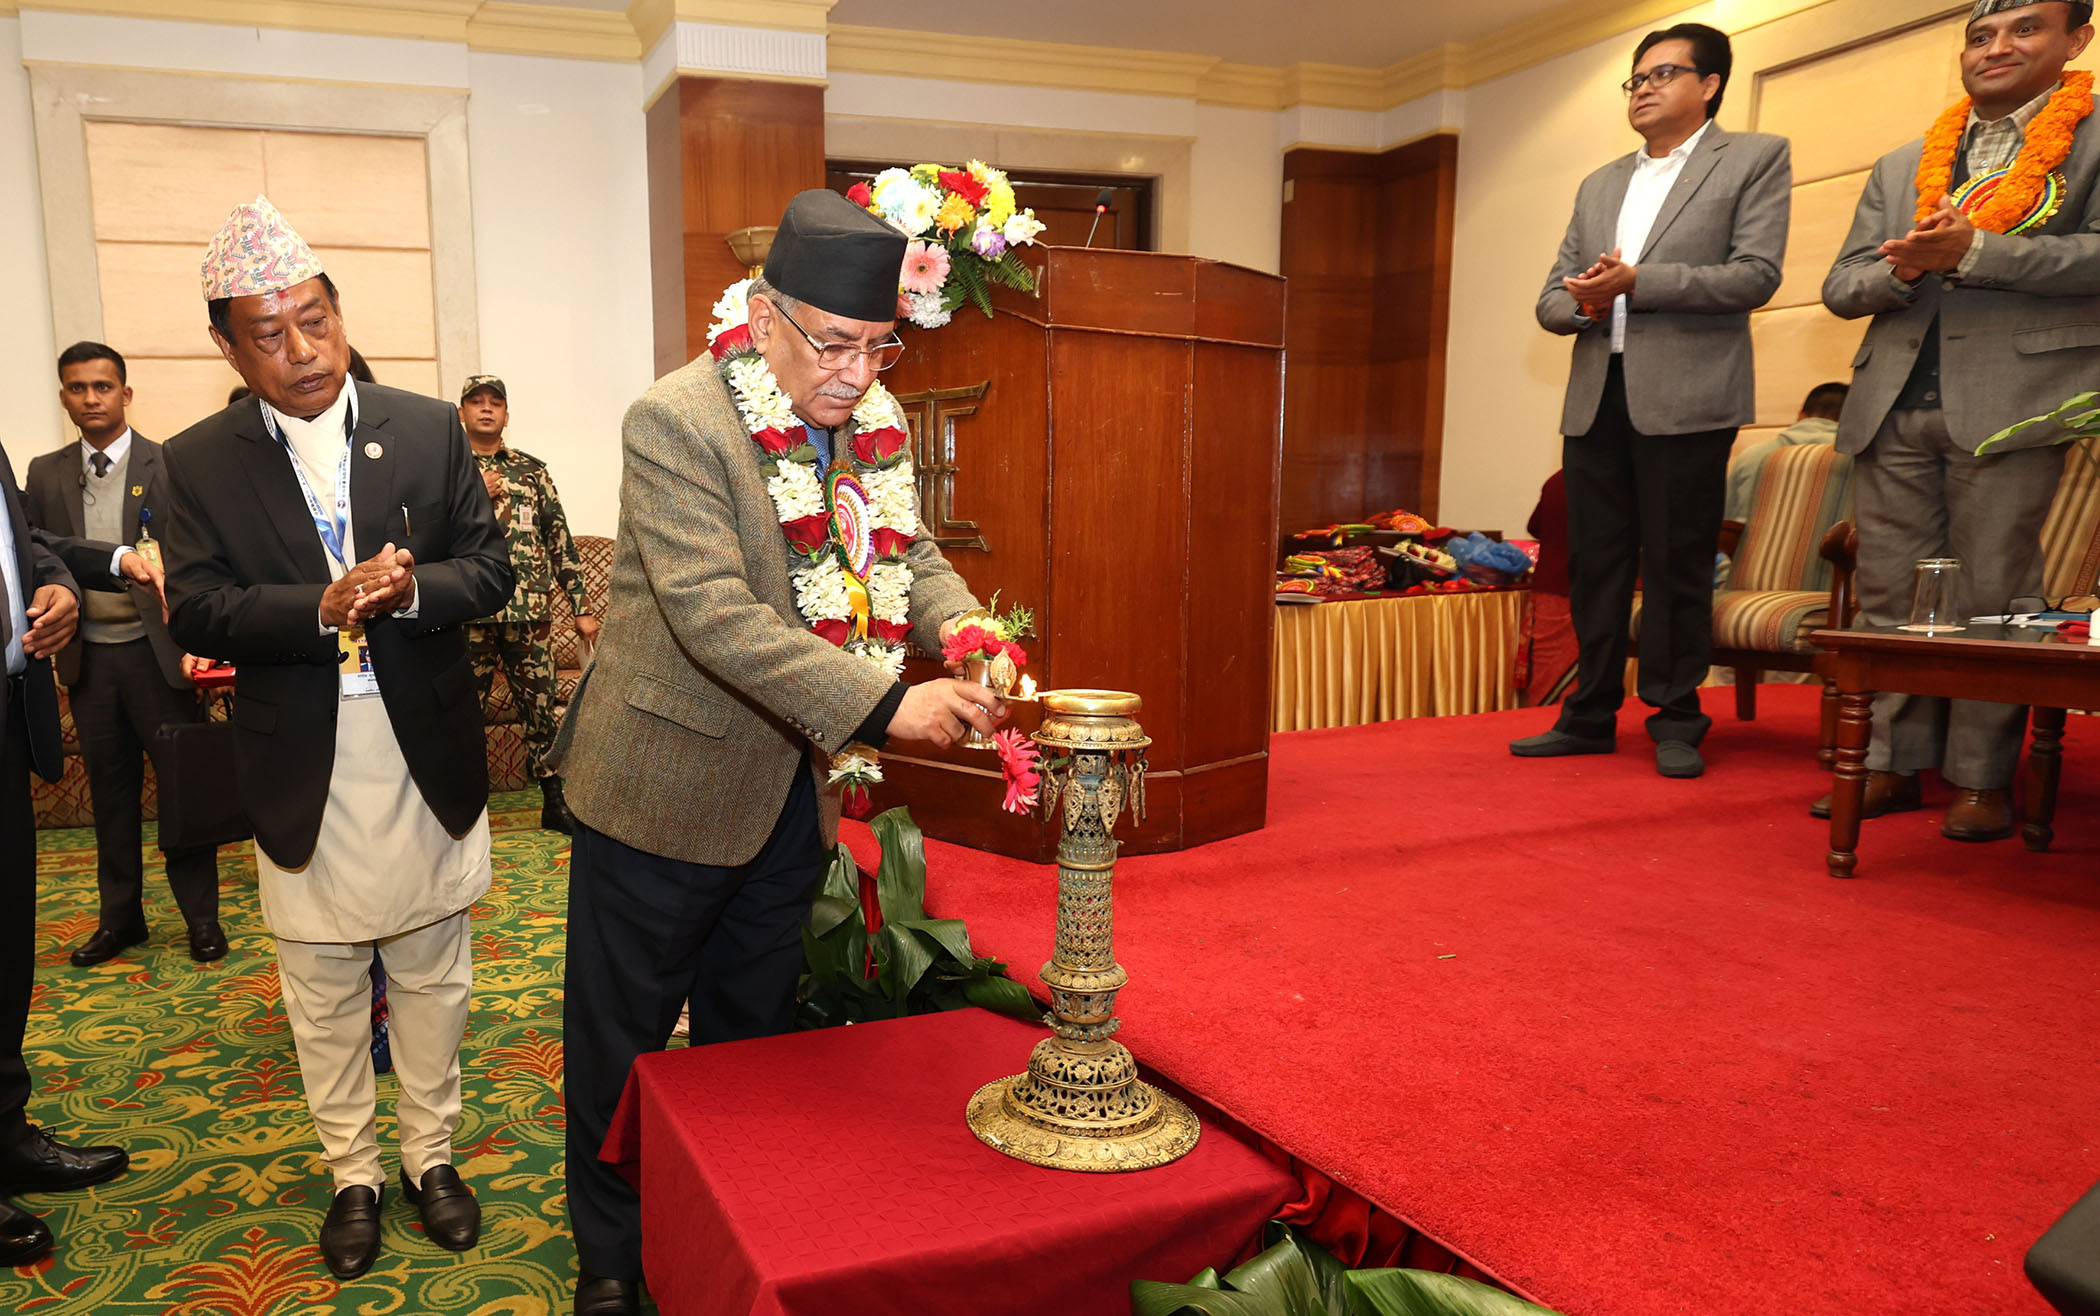 Govt highlights special initiatives in cross-border trade with China: Prime Minister Dahal